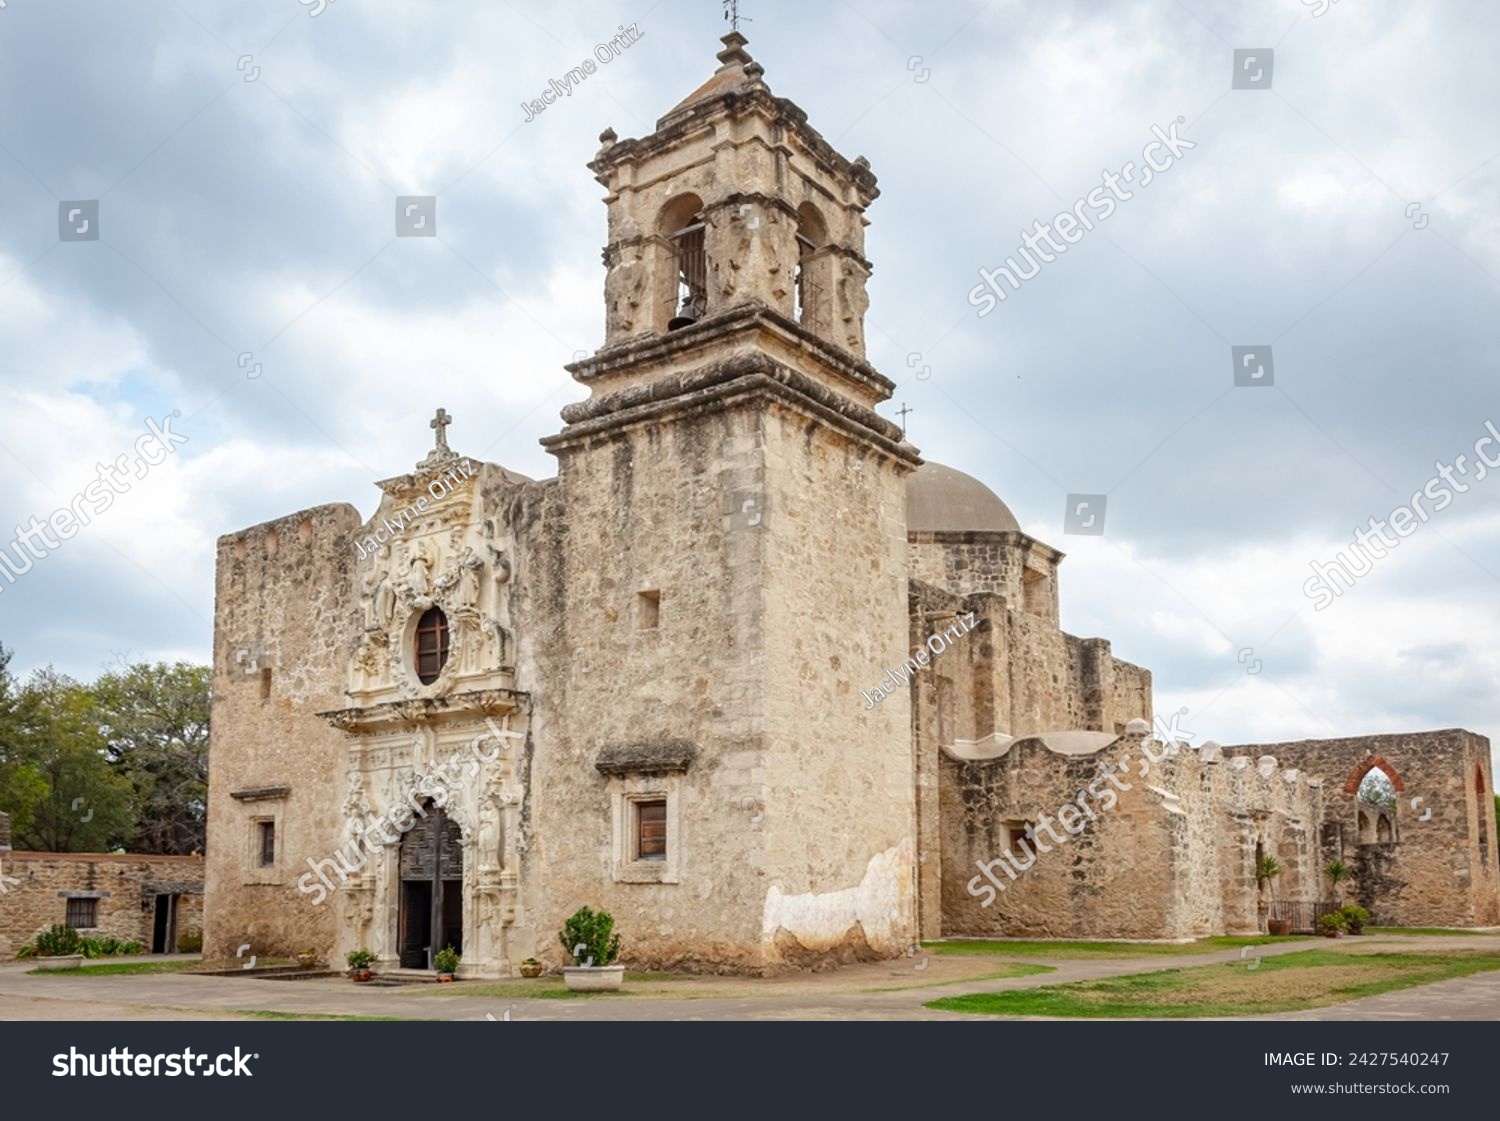 Traditional brick architecture of the old Mission San Jose located at the San Antonio Mission Historical park in San Antonio Texas. Picture is taken on a cloudy overcast day #2427540247